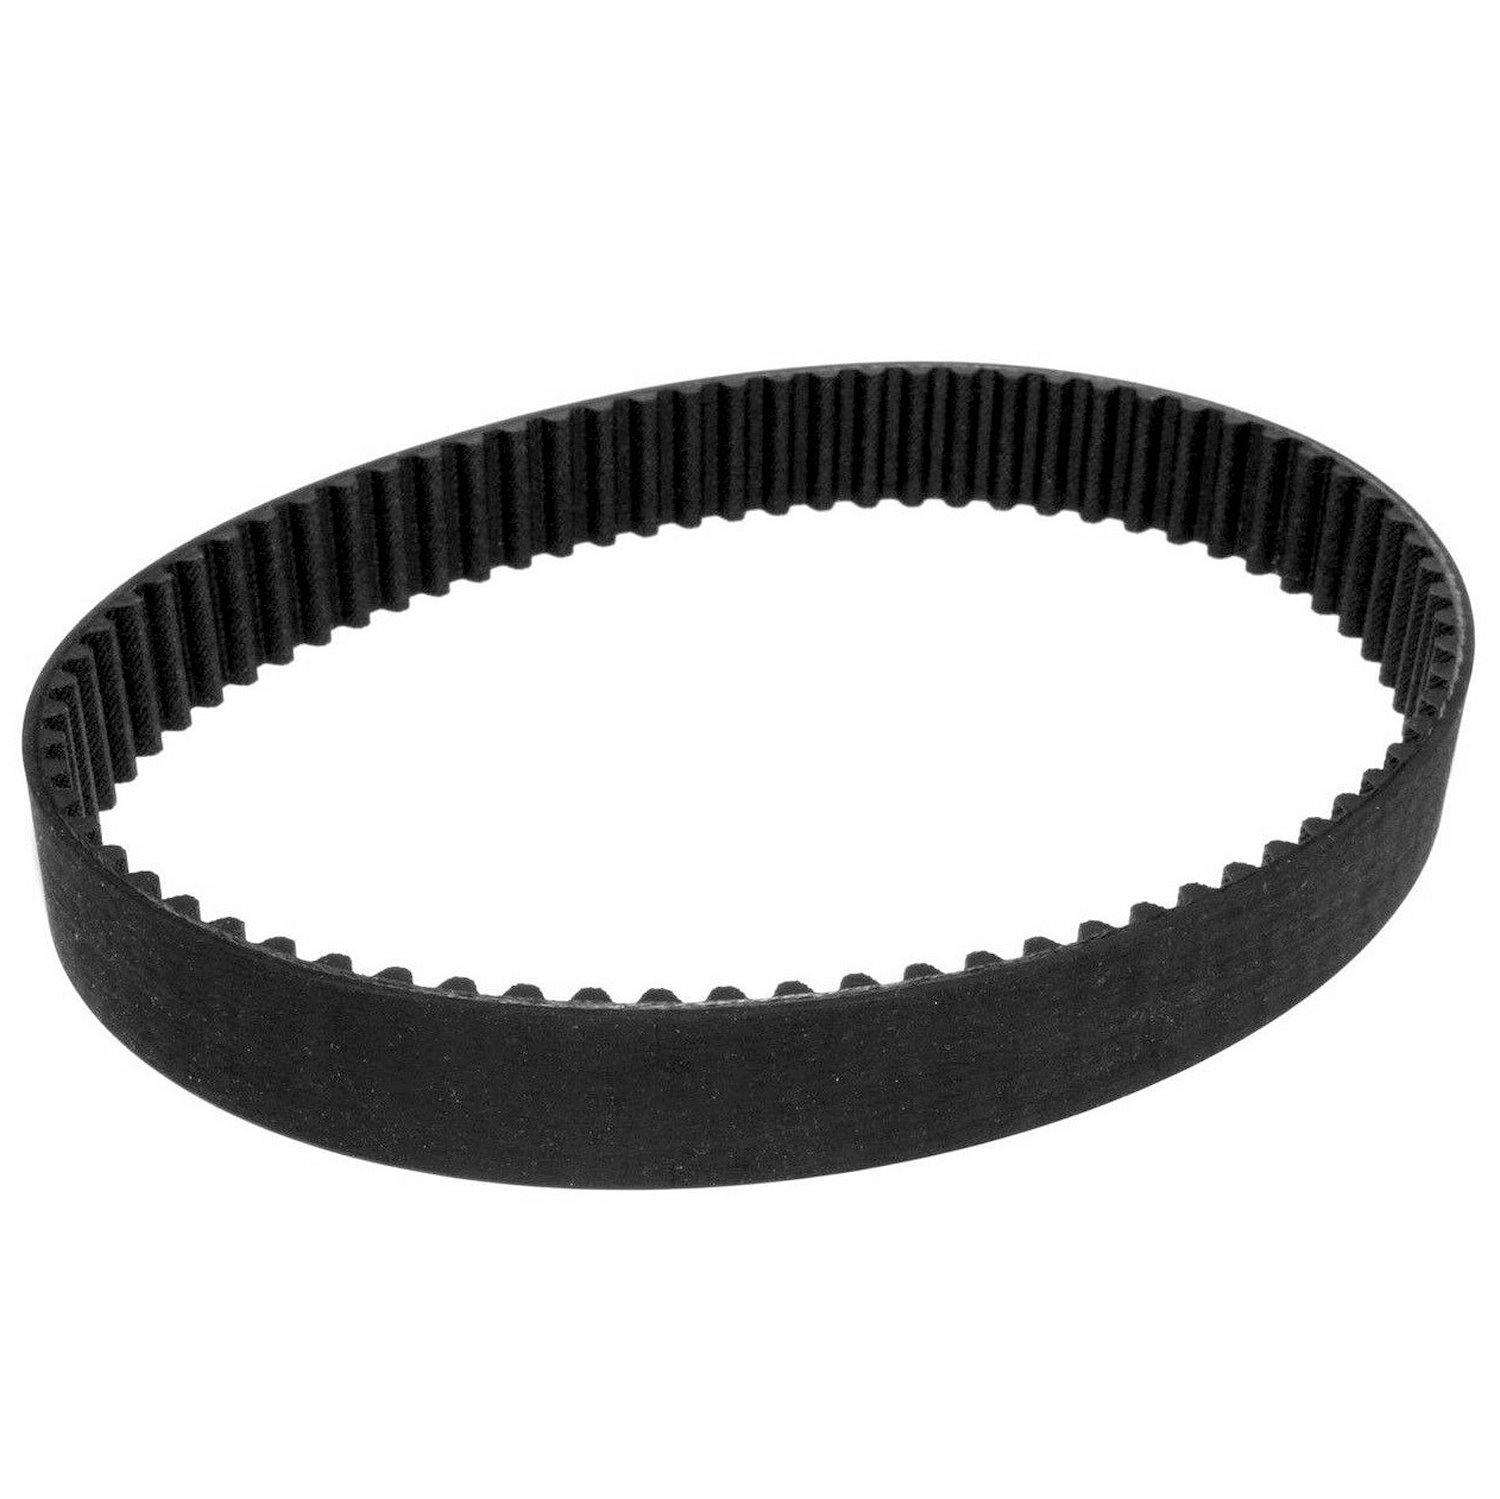 Replacement Timing Belt for Speedmaster PCE262.1004